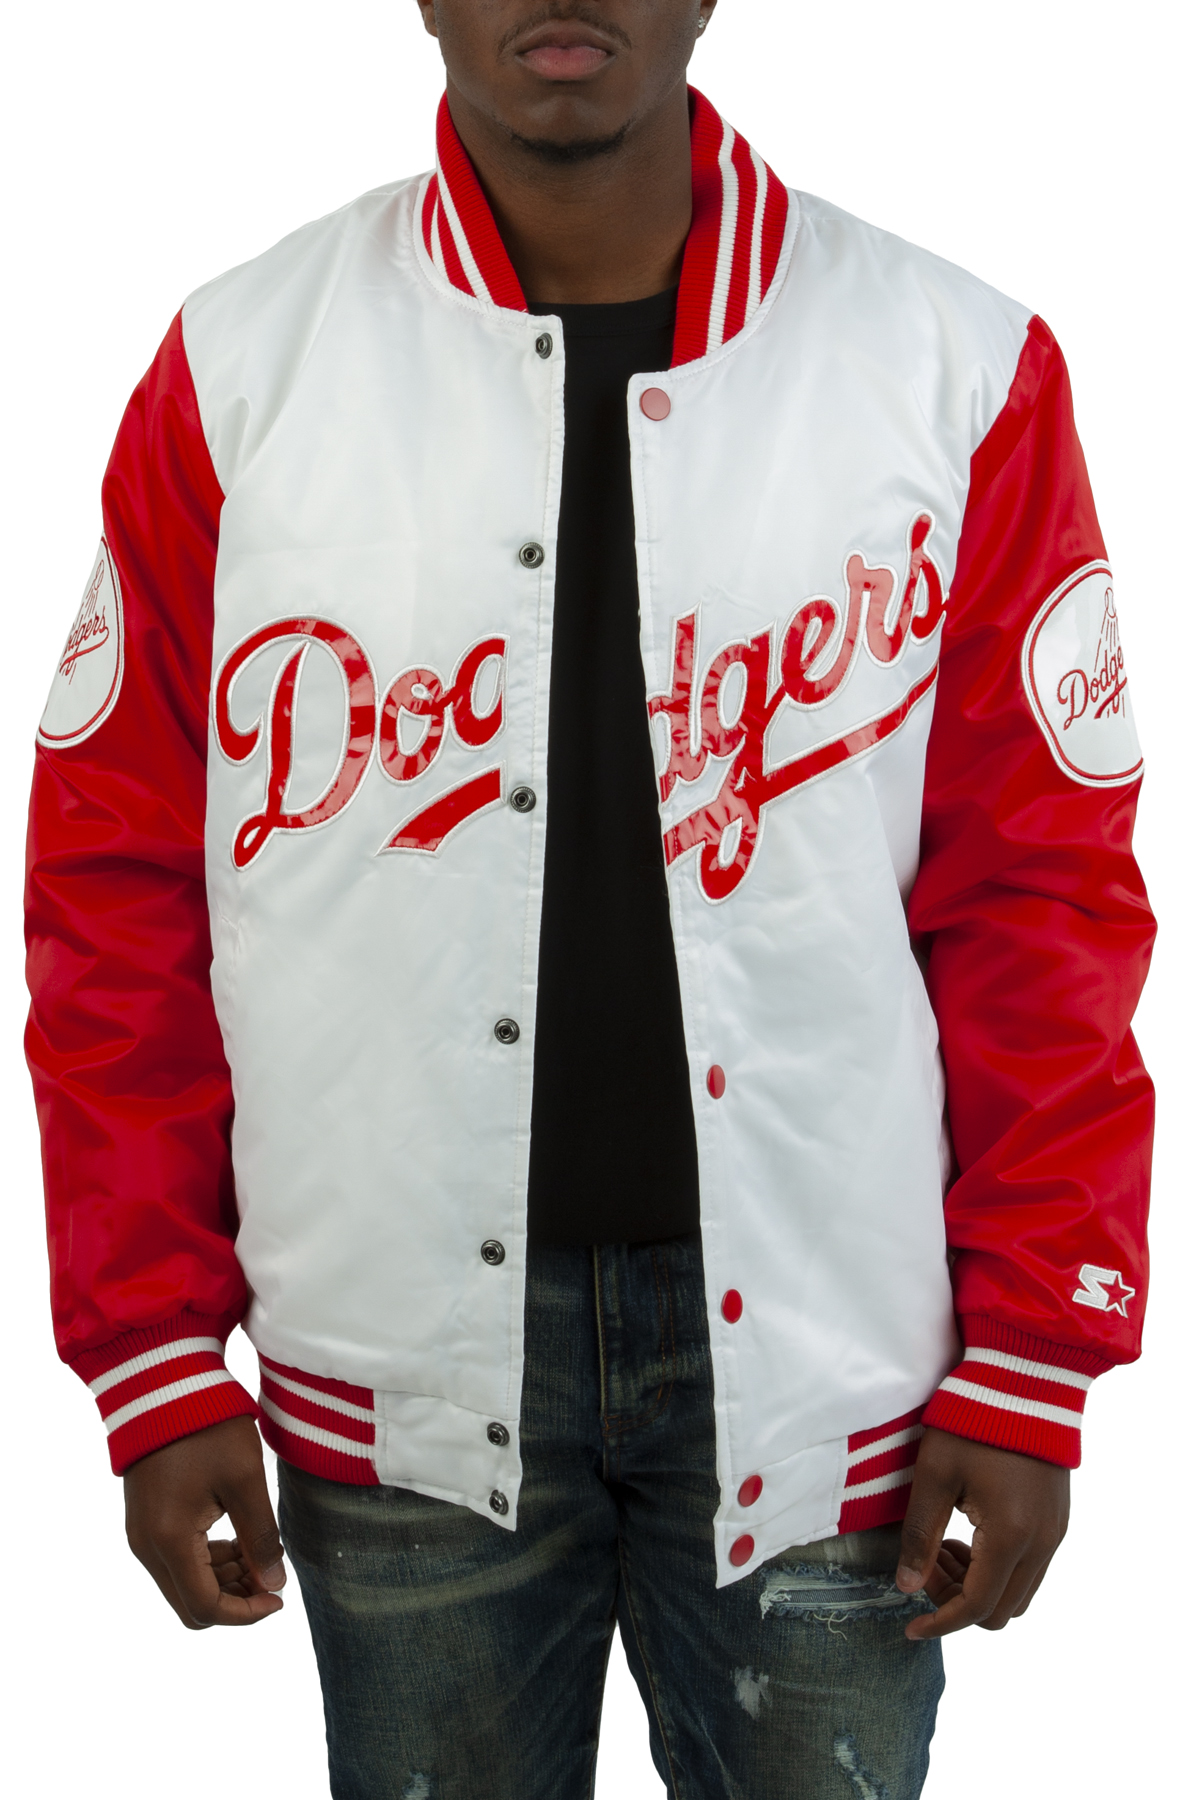 Buy Authentic Dodgers Jackets from LA Jacket